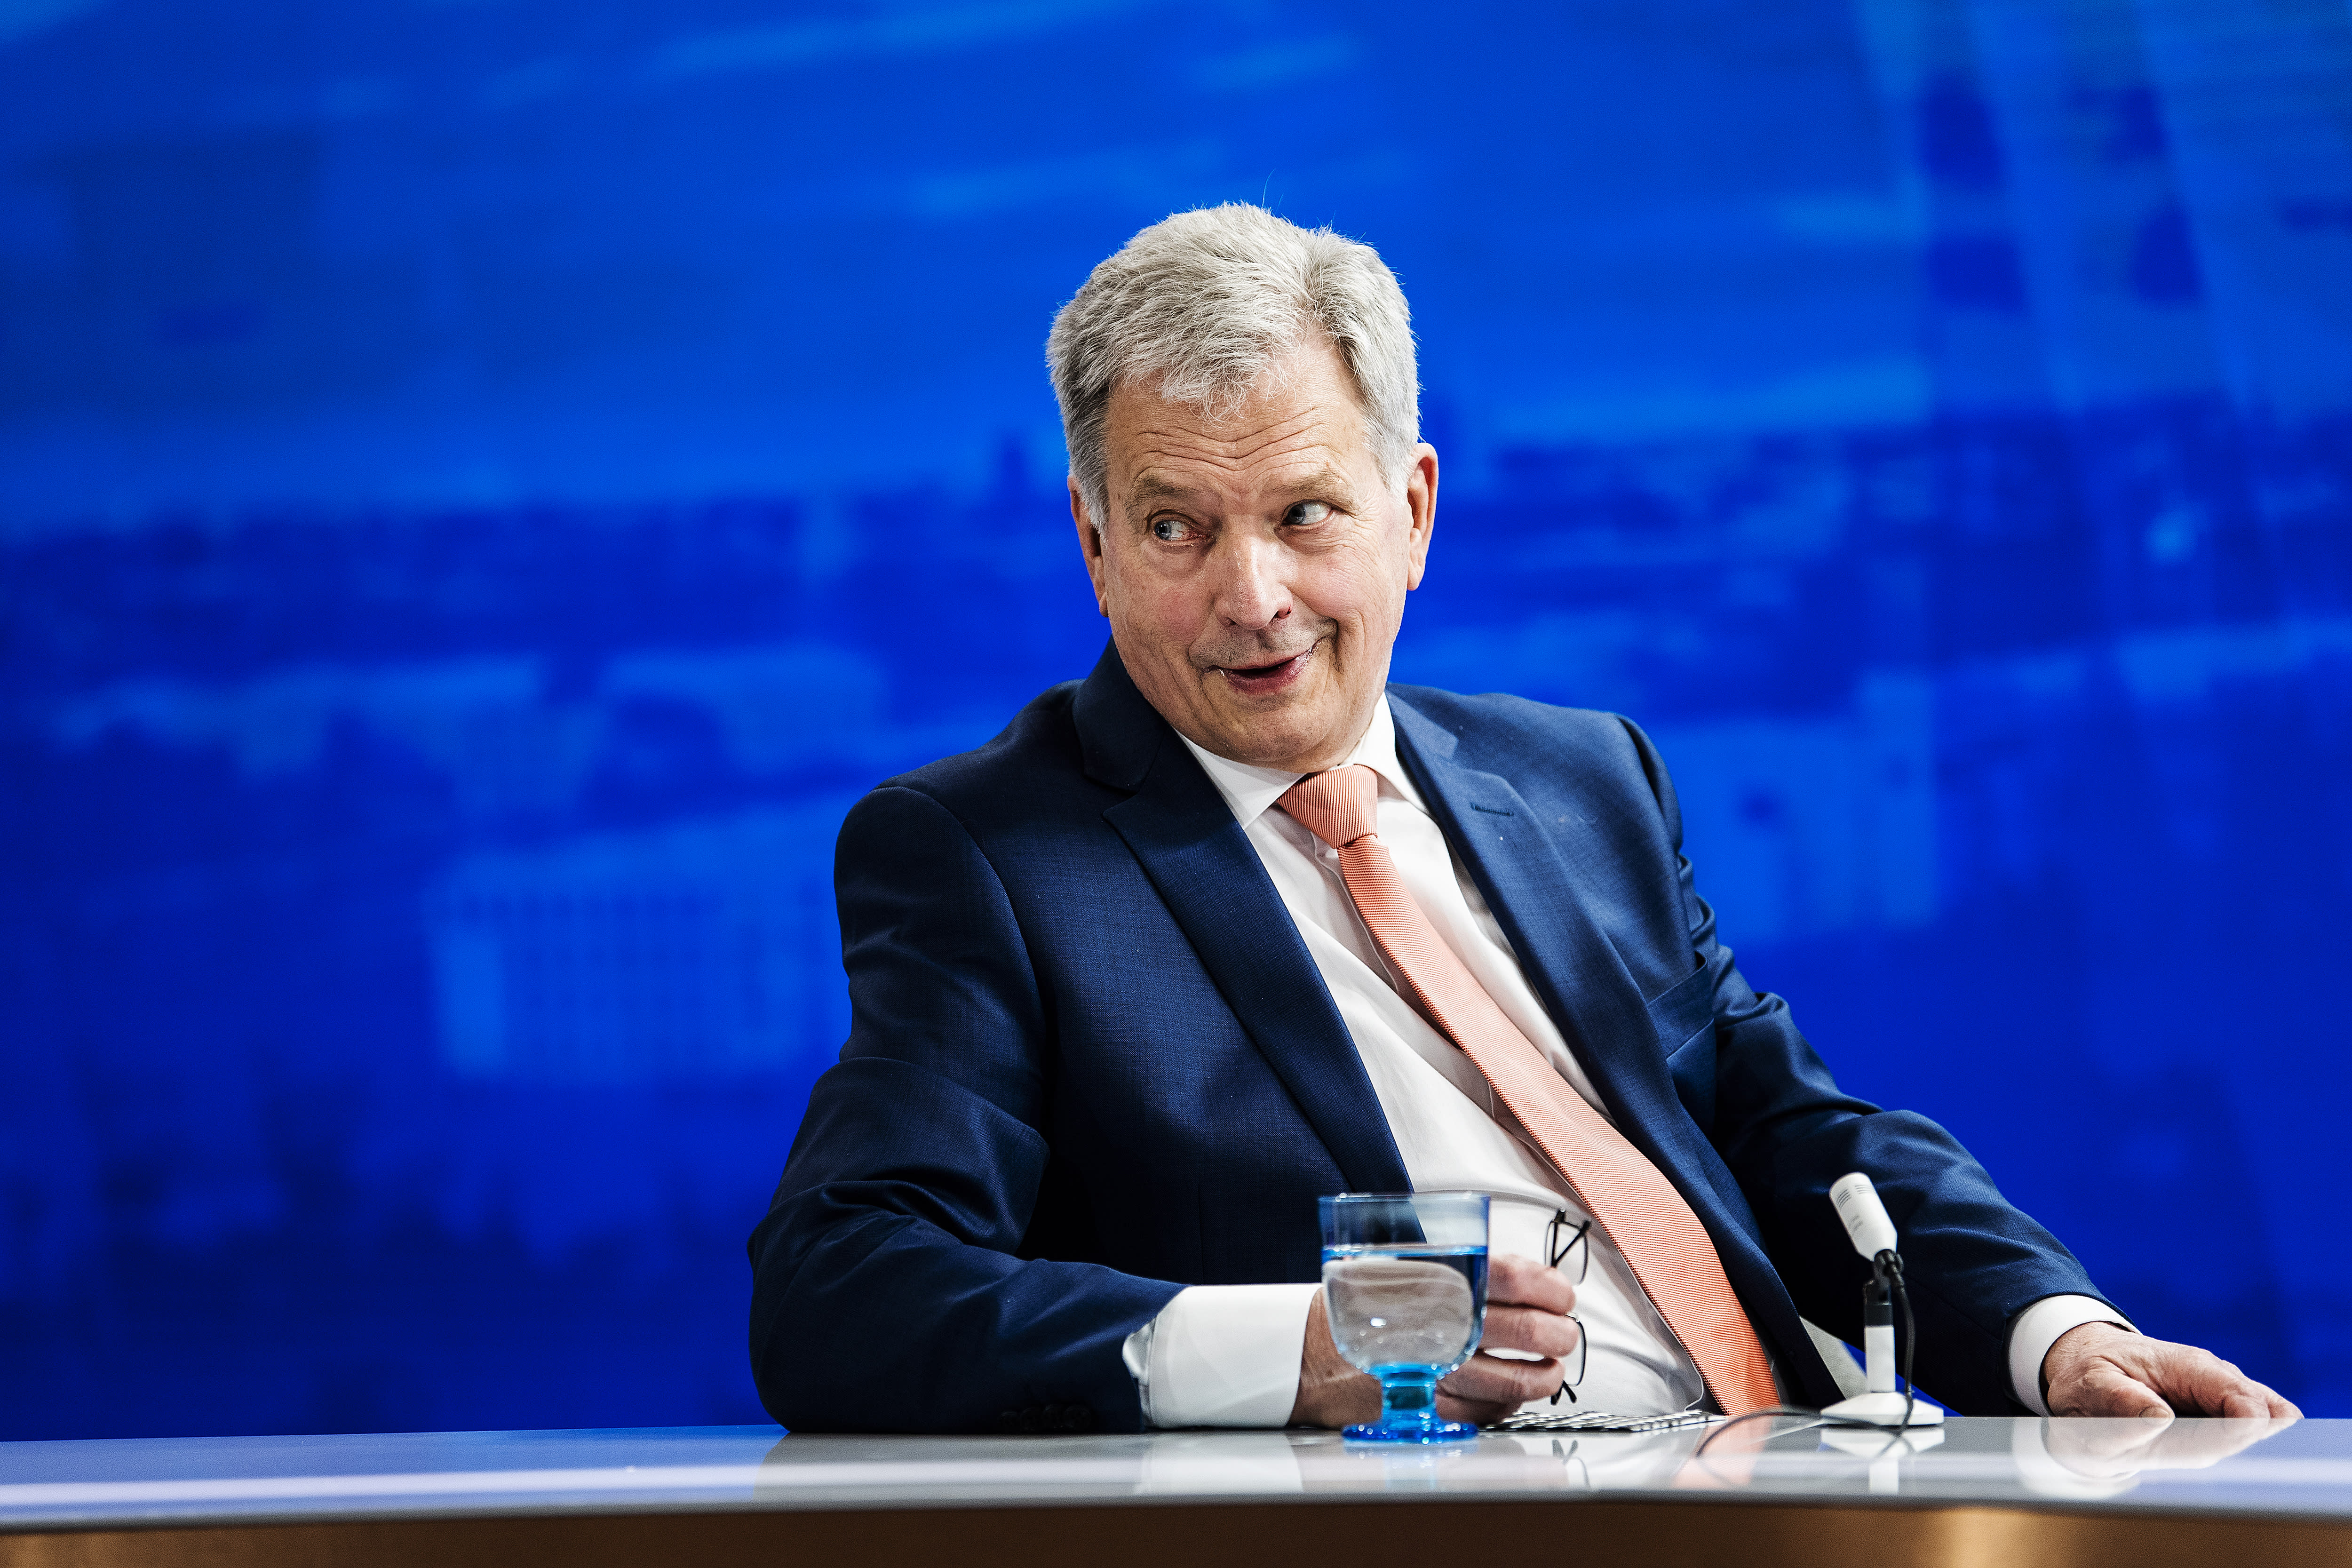 President Niinistö: The meal benefits of good prime ministers are being studied